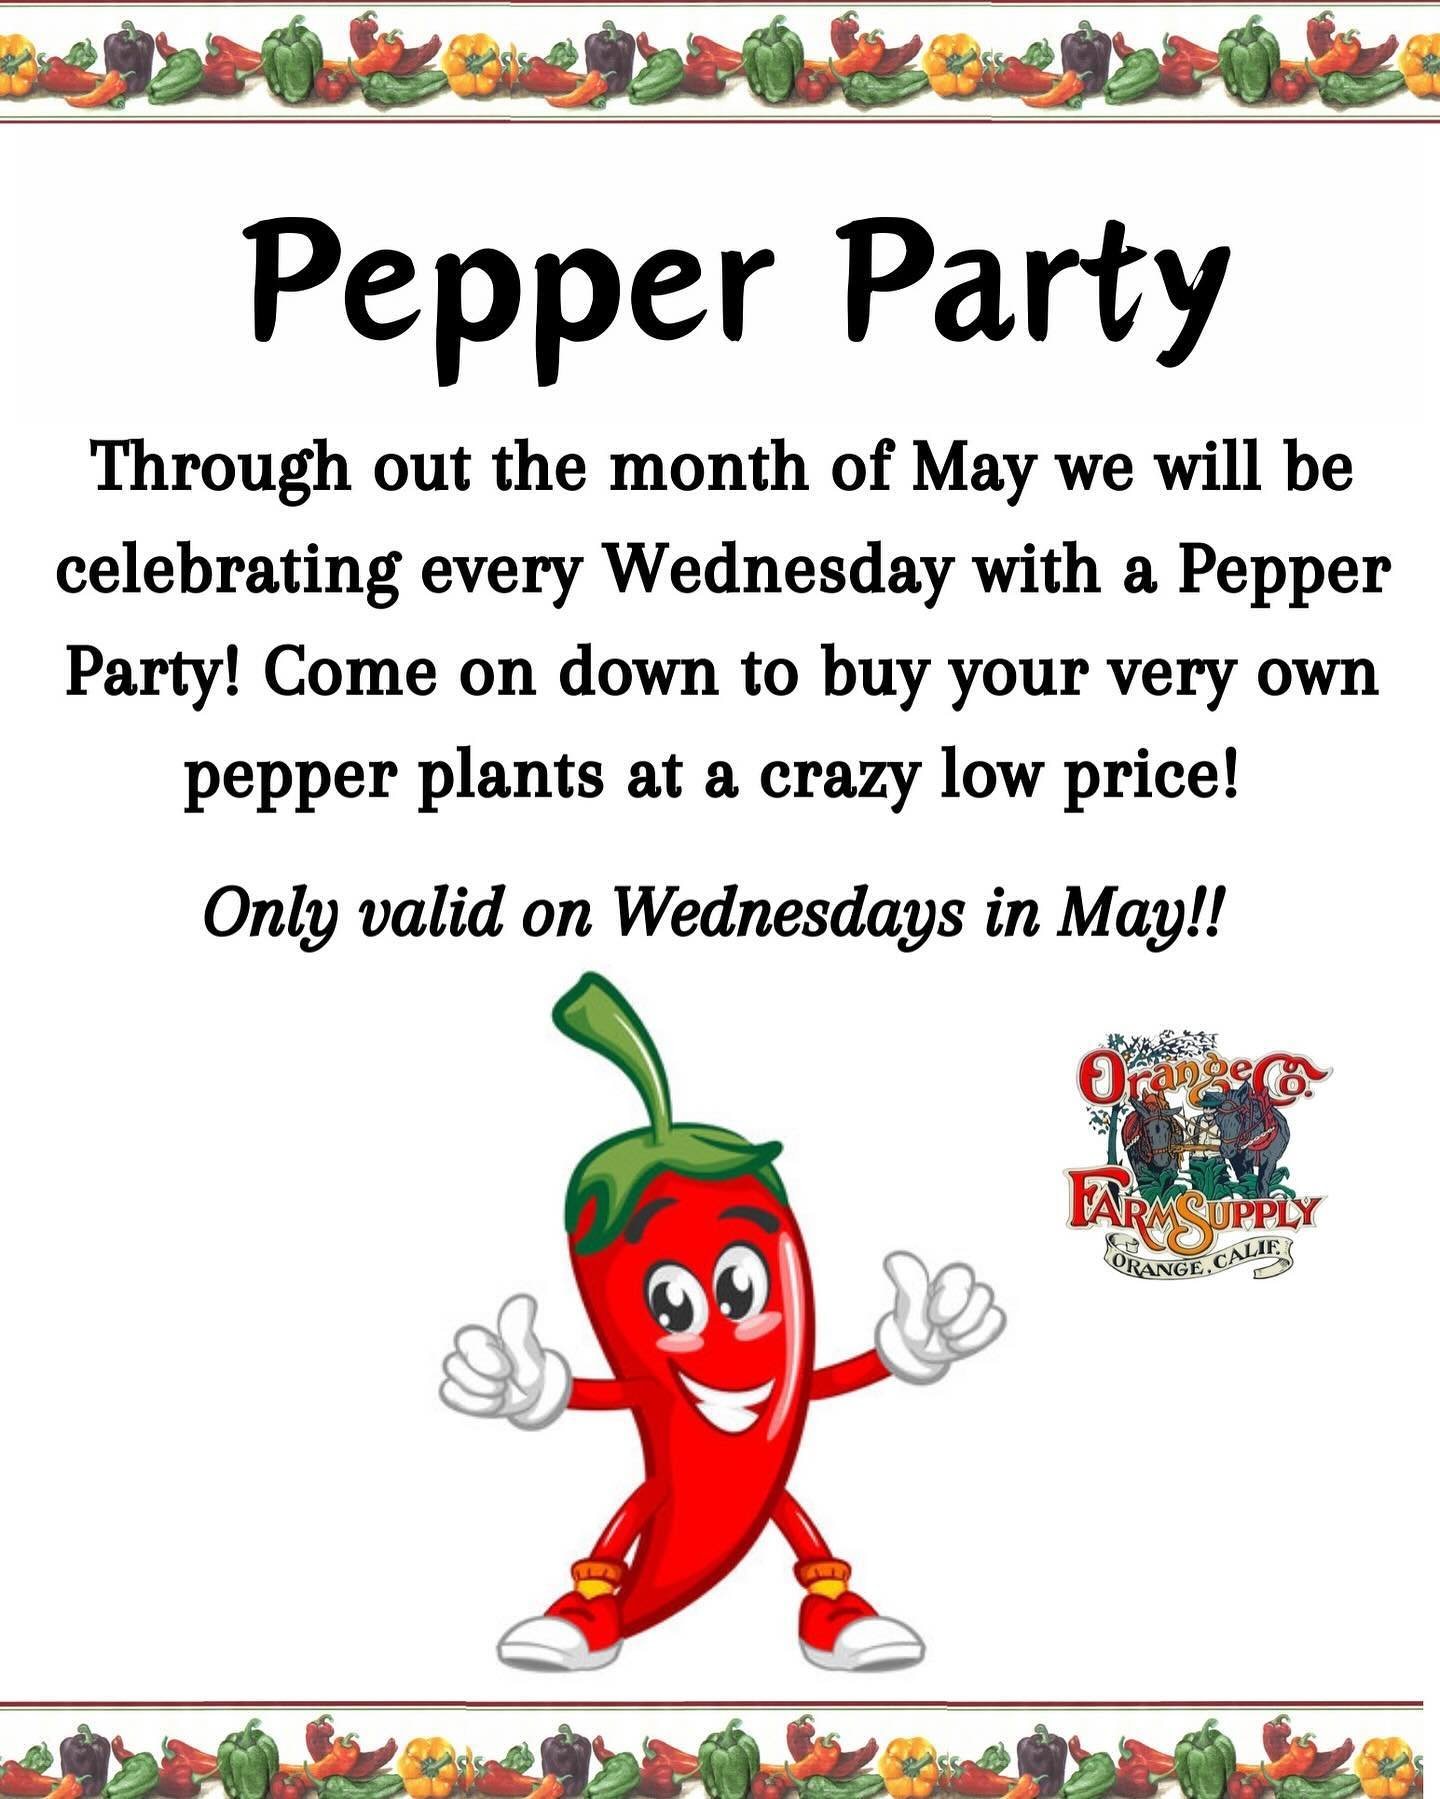 Pepper party is in full swing!! Every Wednesday we will have our peppers at a crazy low price! And bonus! If you buy 4 4&rdquo; square or round pots you can get 2$ off either a G&amp;B potting soil 1 cuft bag or a 4lb bag of G&amp;B tomato, vegetable